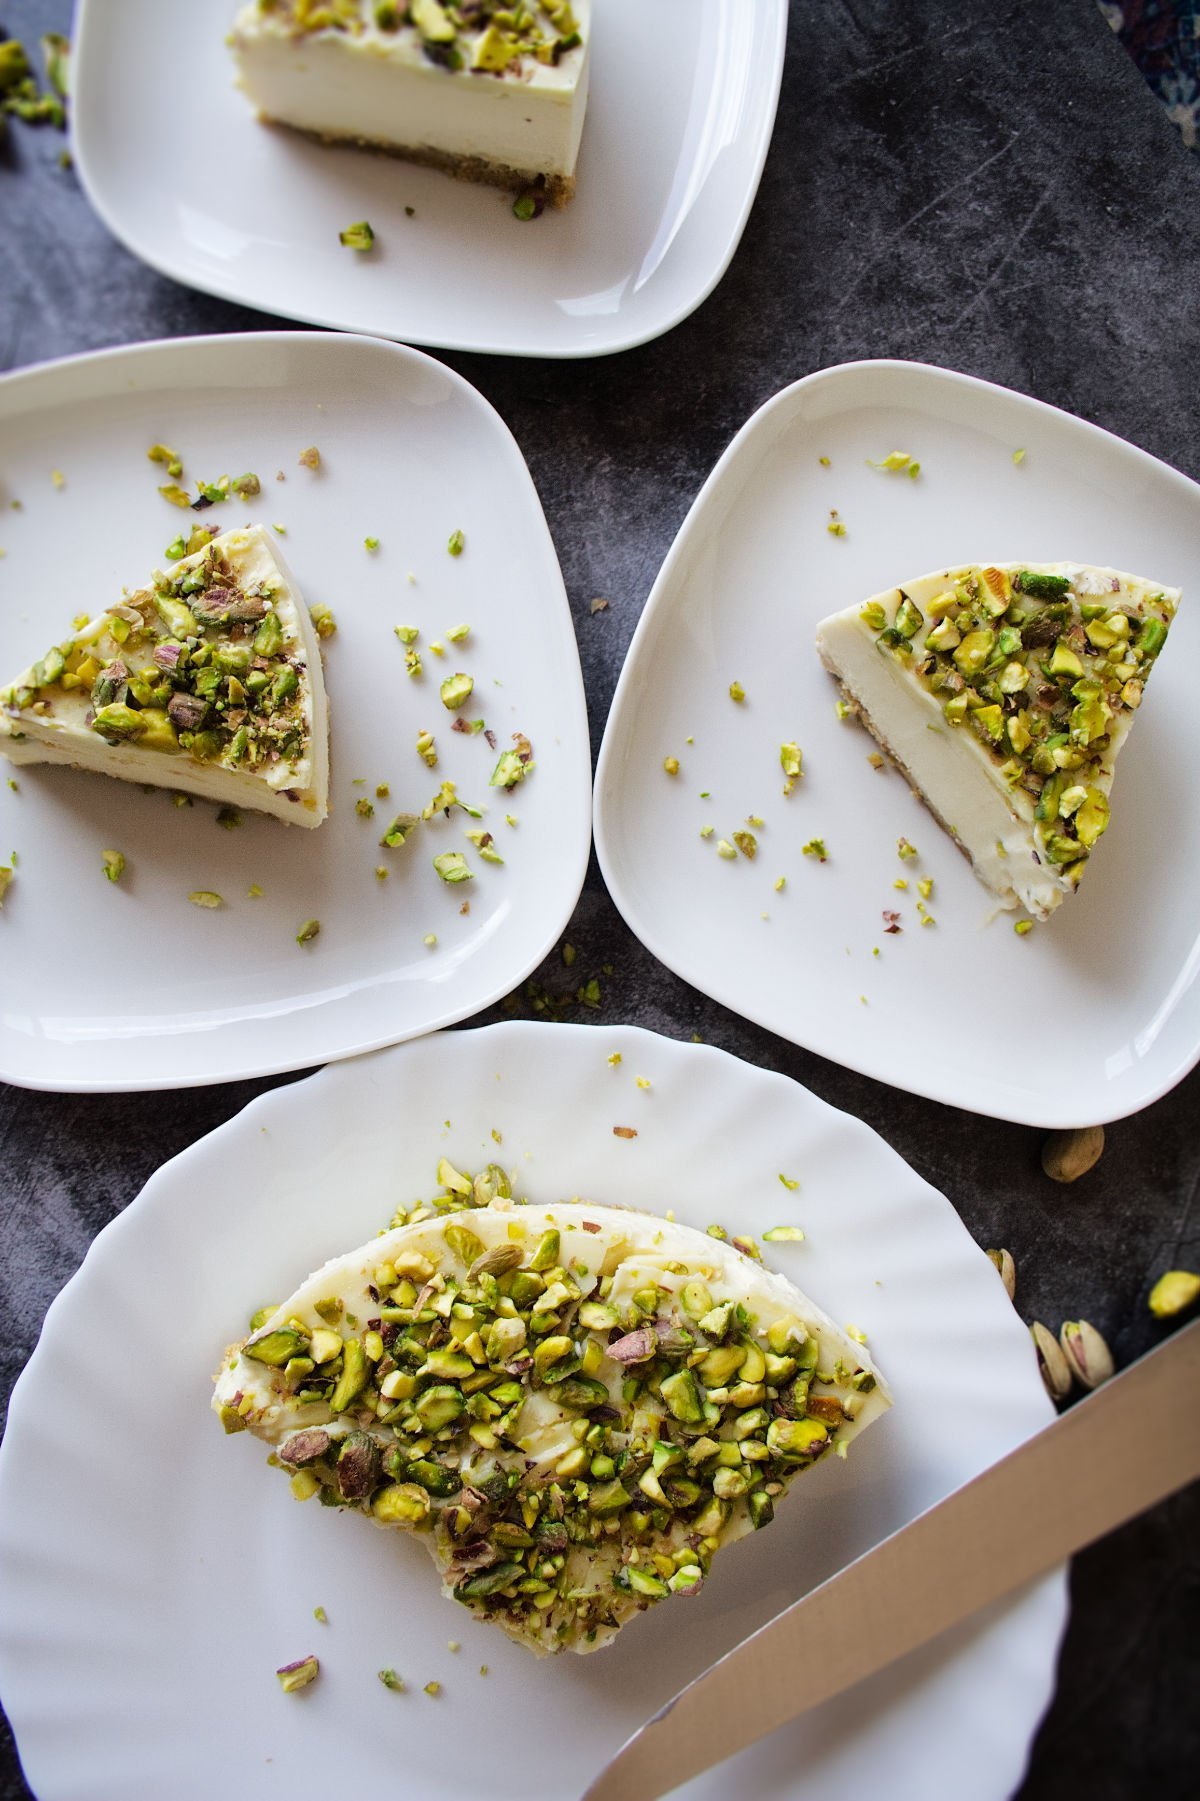 Slices of white chocolate cheesecake with pistachio crust sit on a few. plates waiting to be served.